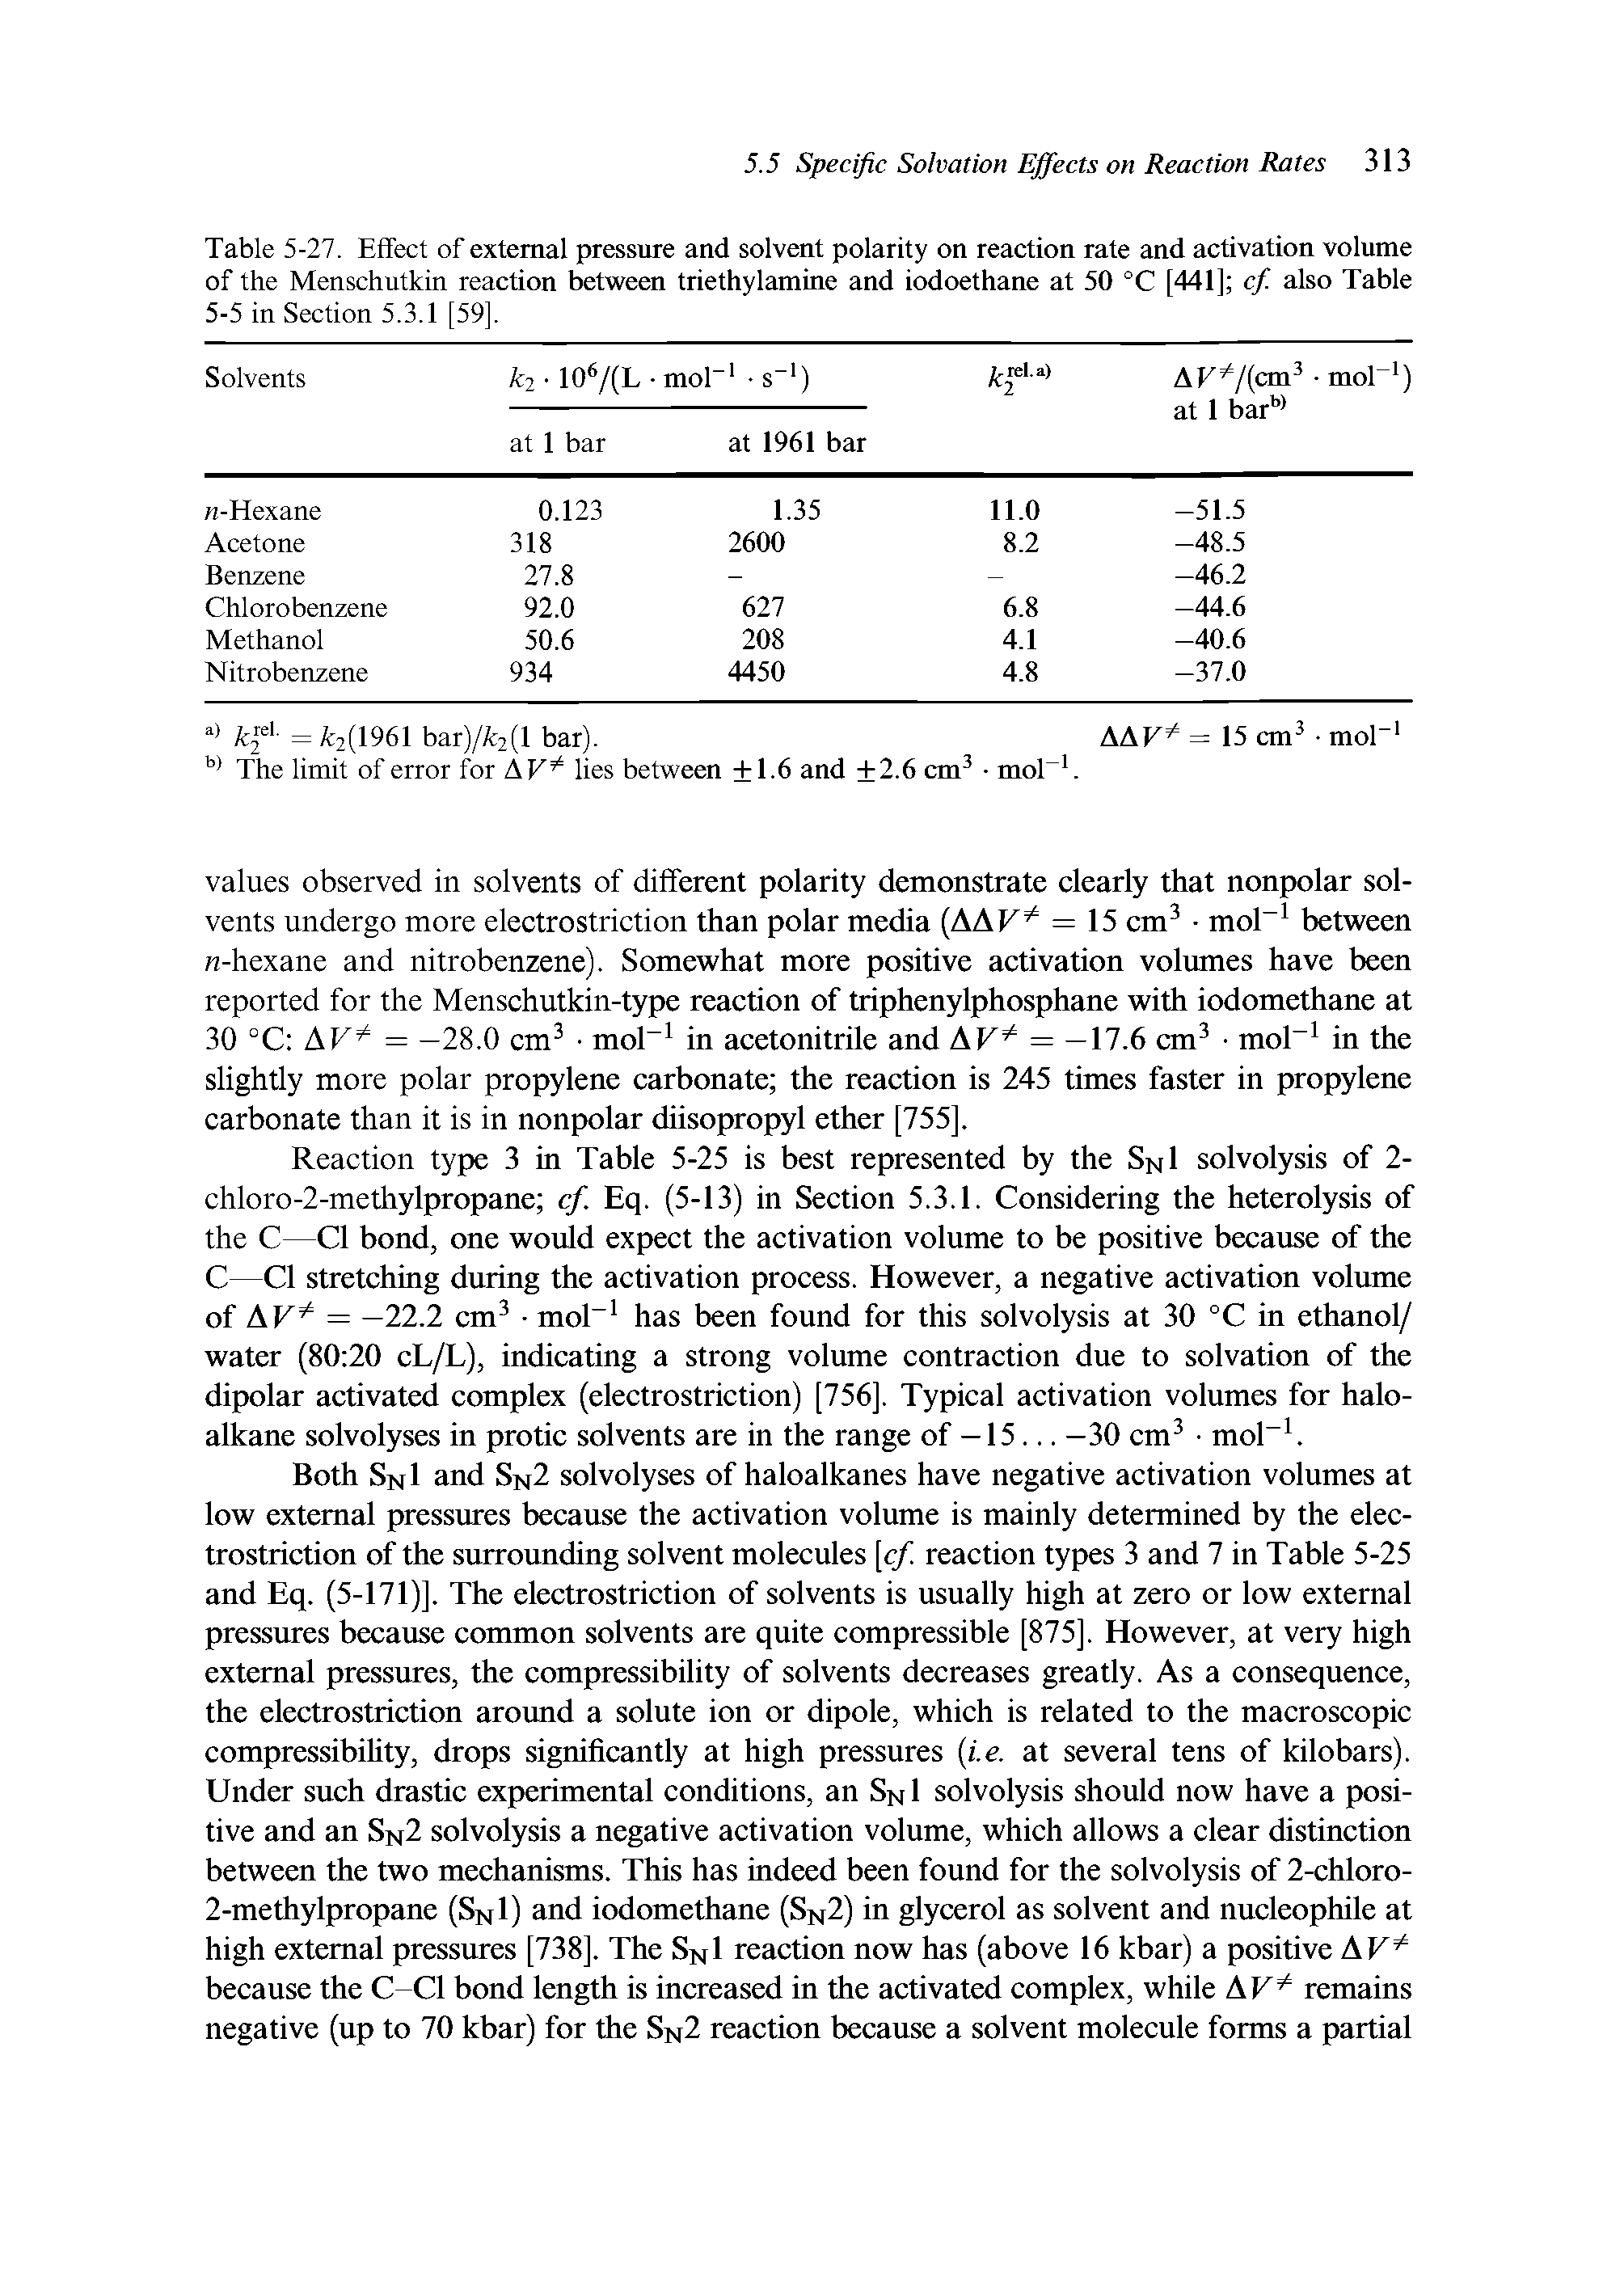 Table 5-27. Effect of external pressure and solvent polarity on reaction rate and activation volume of the Menschutkin reaction between triethylamine and iodoethane at 50 °C [441] cf. also Table 5-5 in Section 5.3.1 [59].